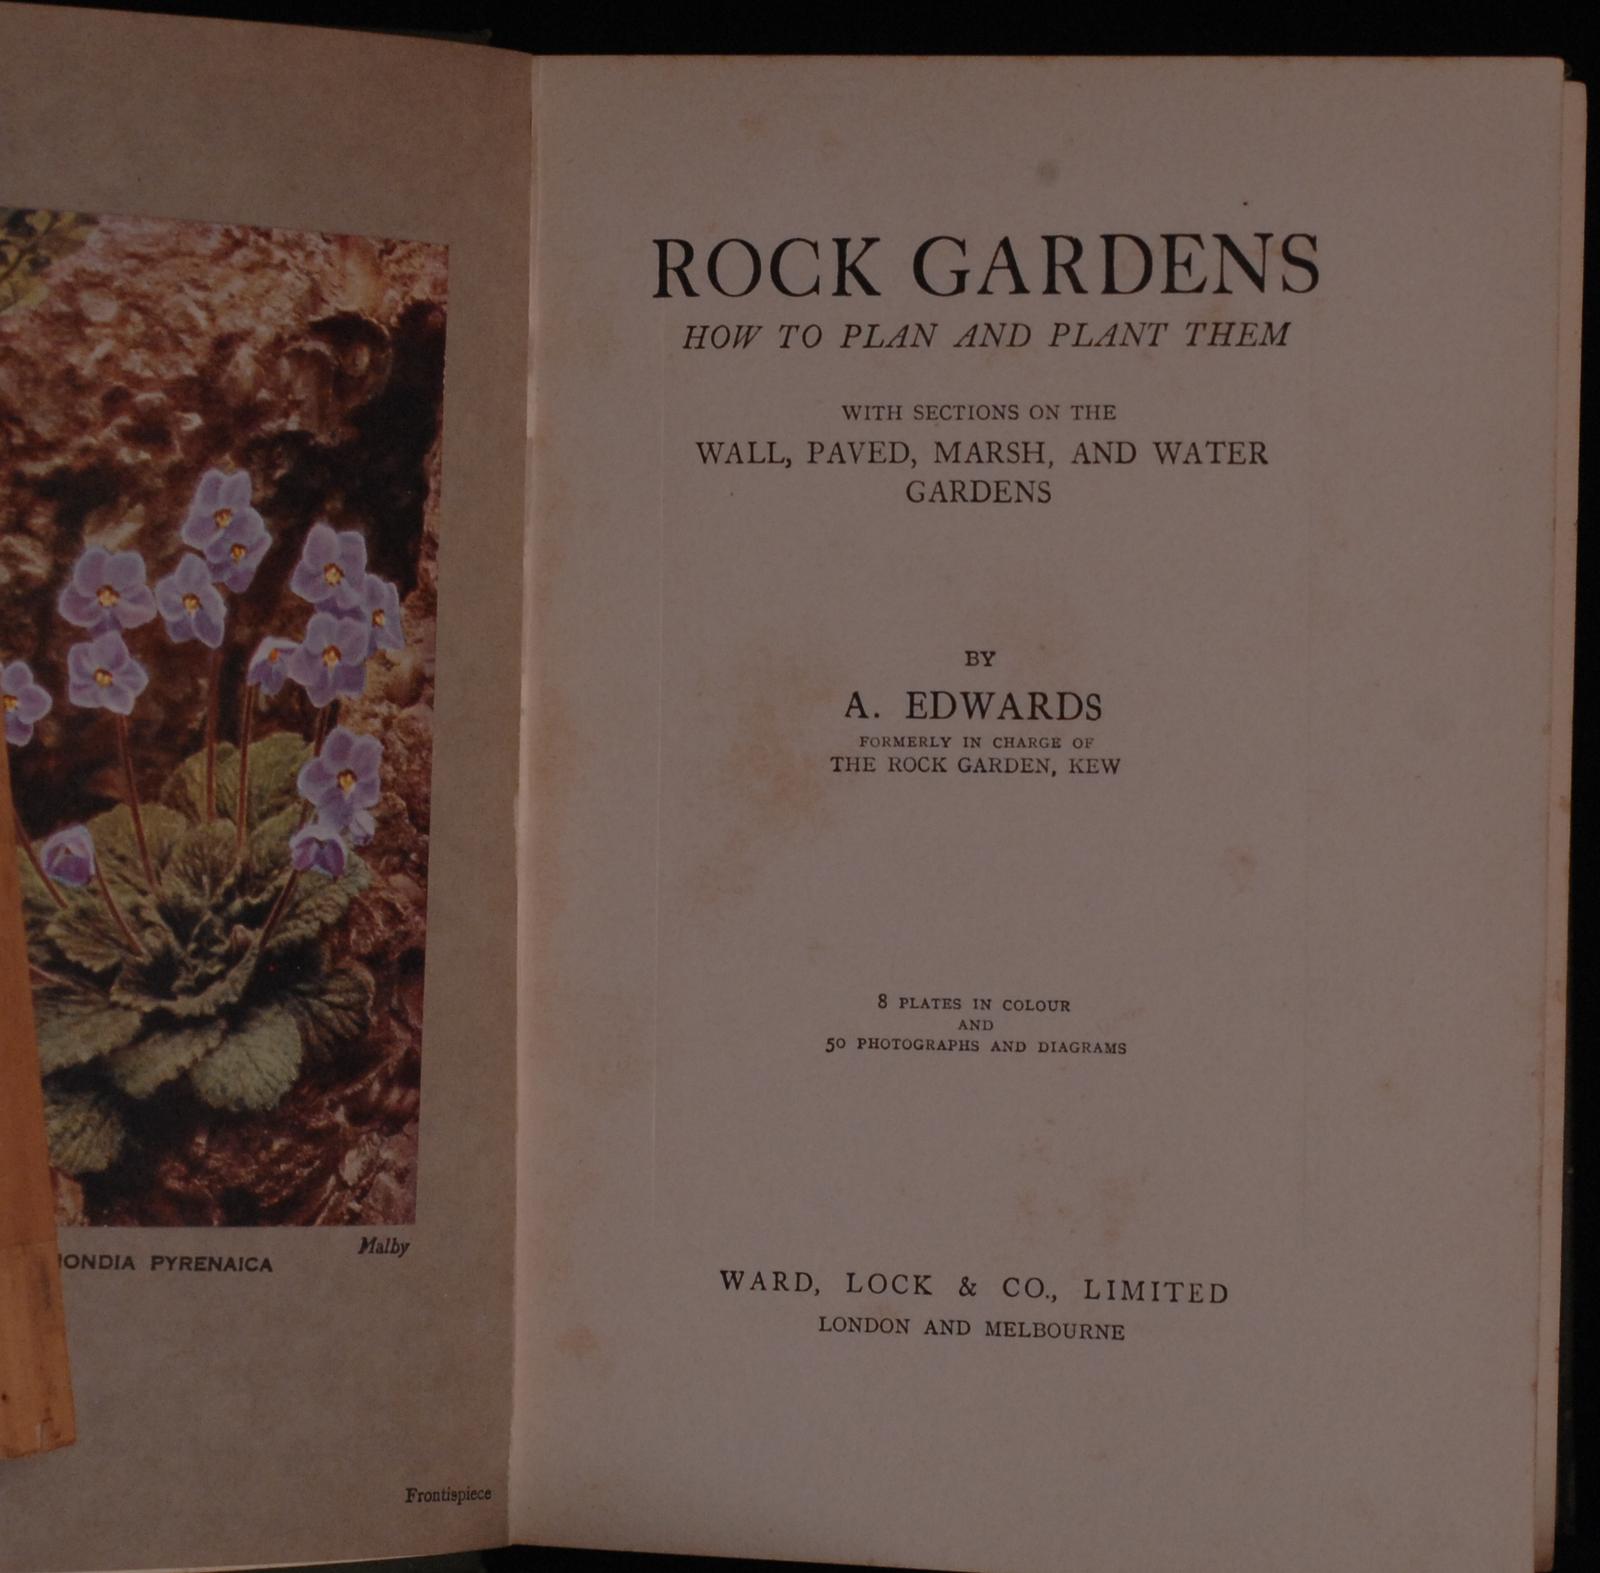 mbb005801d_-_Edwards_A_-_Rock_Gardens_How_To_Plan_And_Plant_Them_-_Contains_Illustrations.jpg